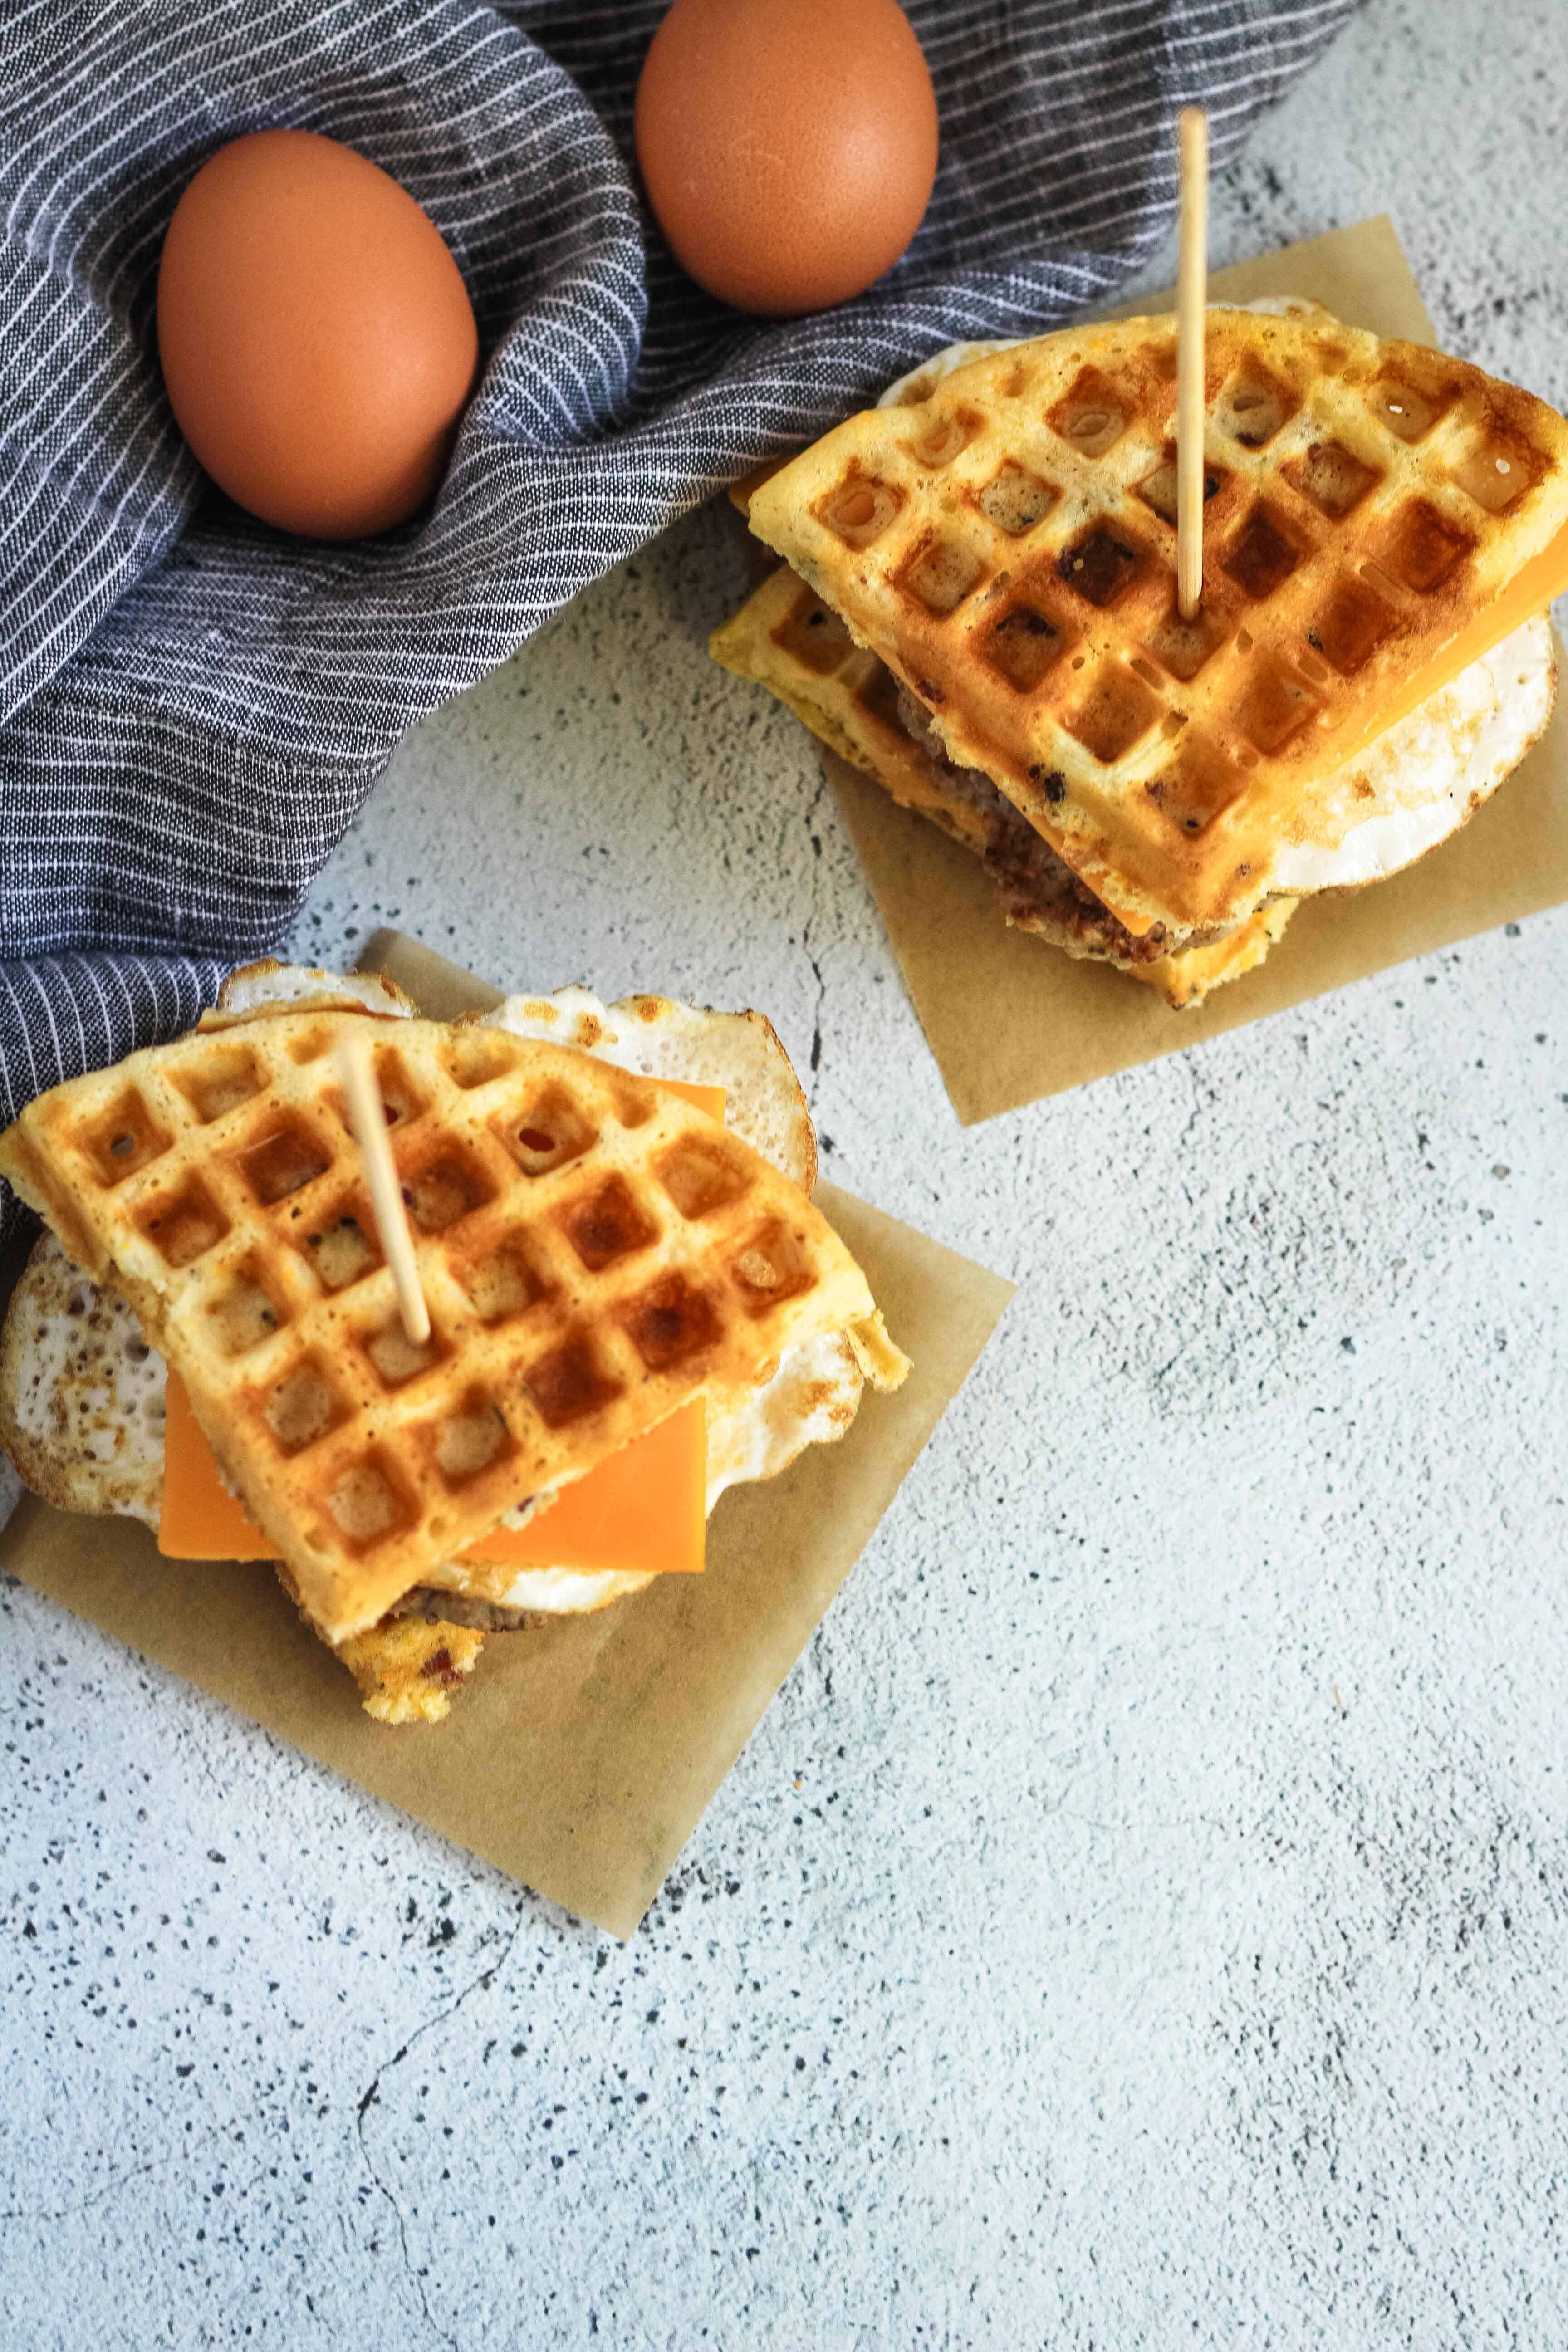 Wondering what to make with leftover waffles? These Sausage and Egg Waffle Sandwiches are the perfect breakfast sandwich for lazy weekend mornings